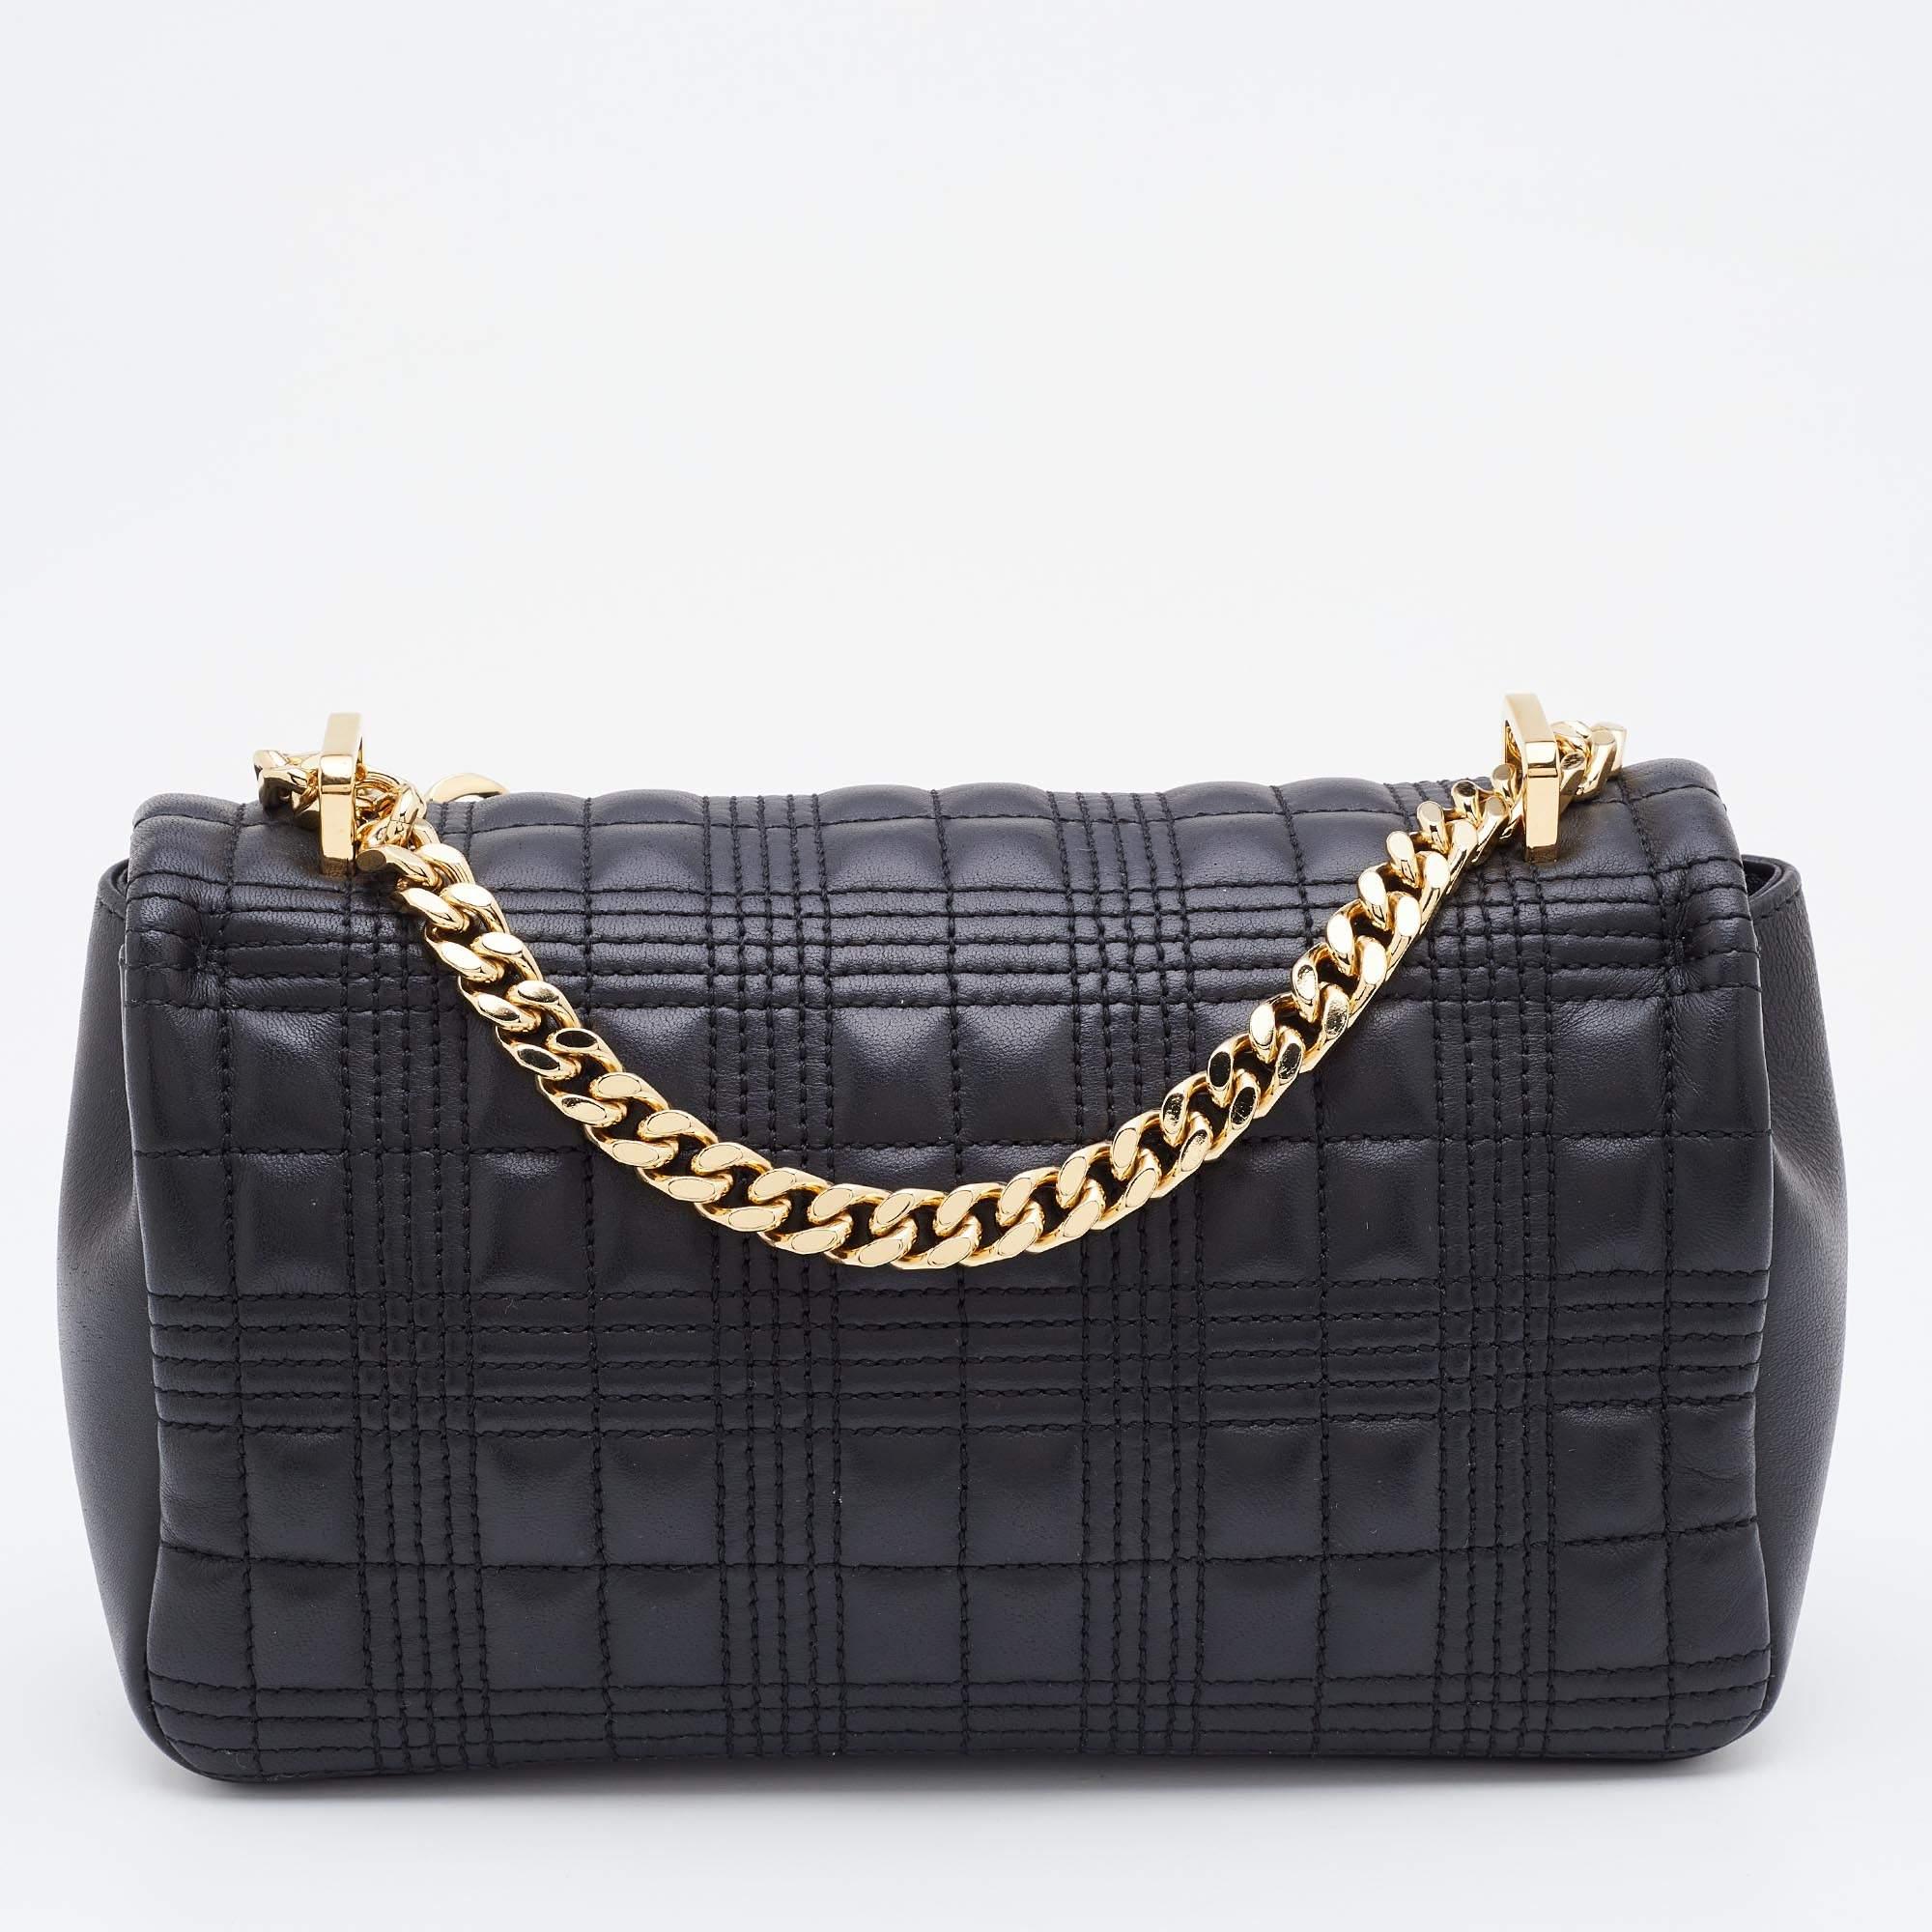 This Lola shoulder bag from Burberry does complete justice to the brand's timeless aesthetic. Externally, it is made using black and white quilted leather with a gold-tone TB accent decorating the front. It features a chain shoulder strap and an